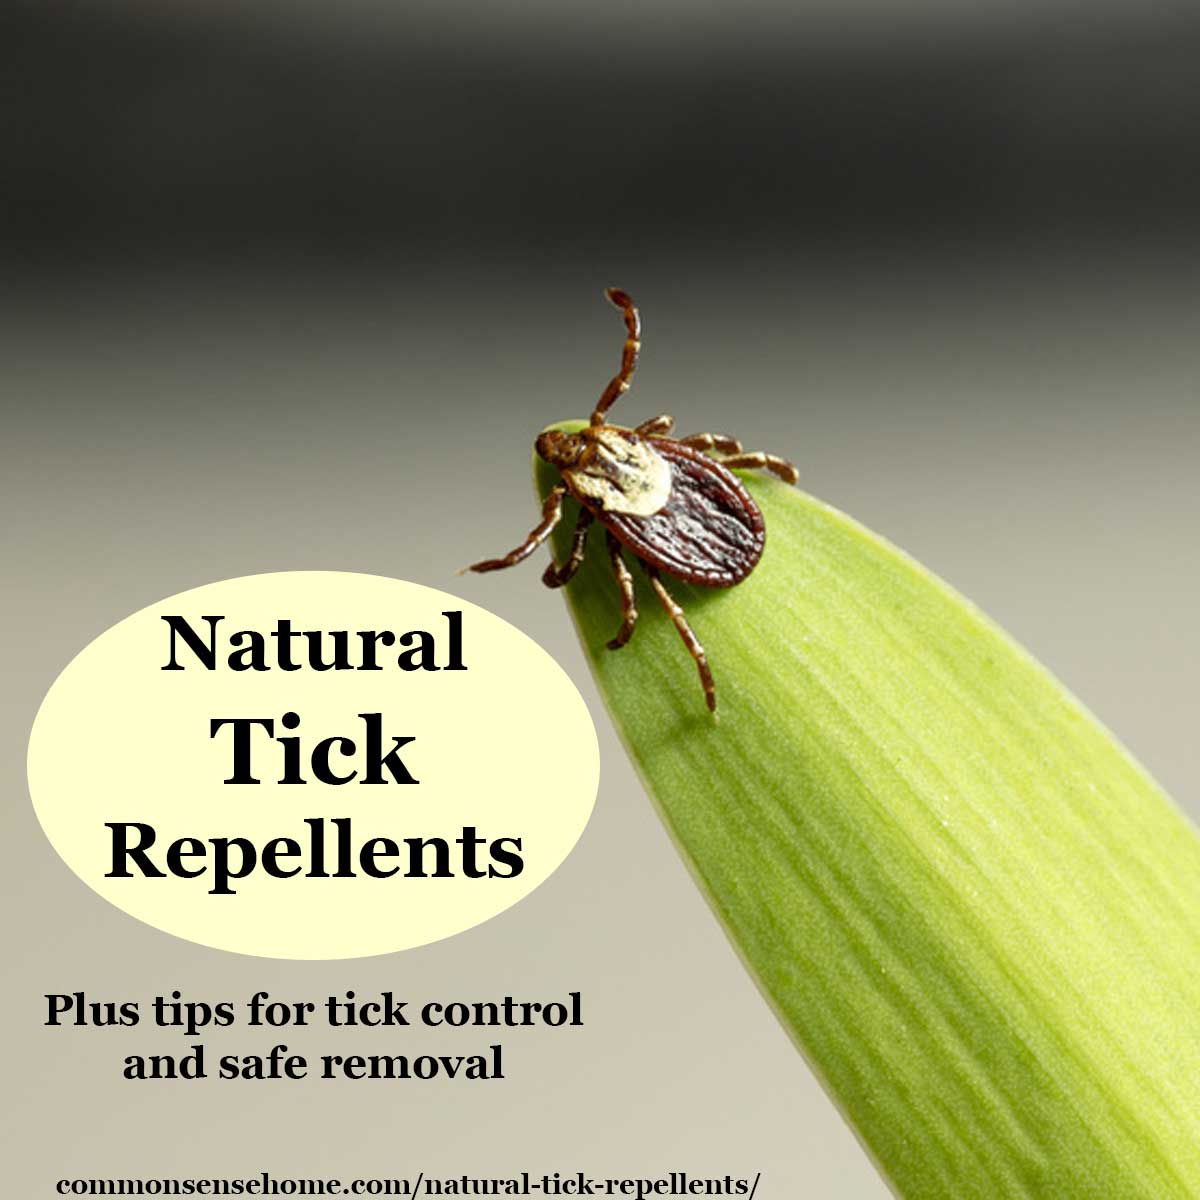 tick on blade of grass with text "natural tick repellents"